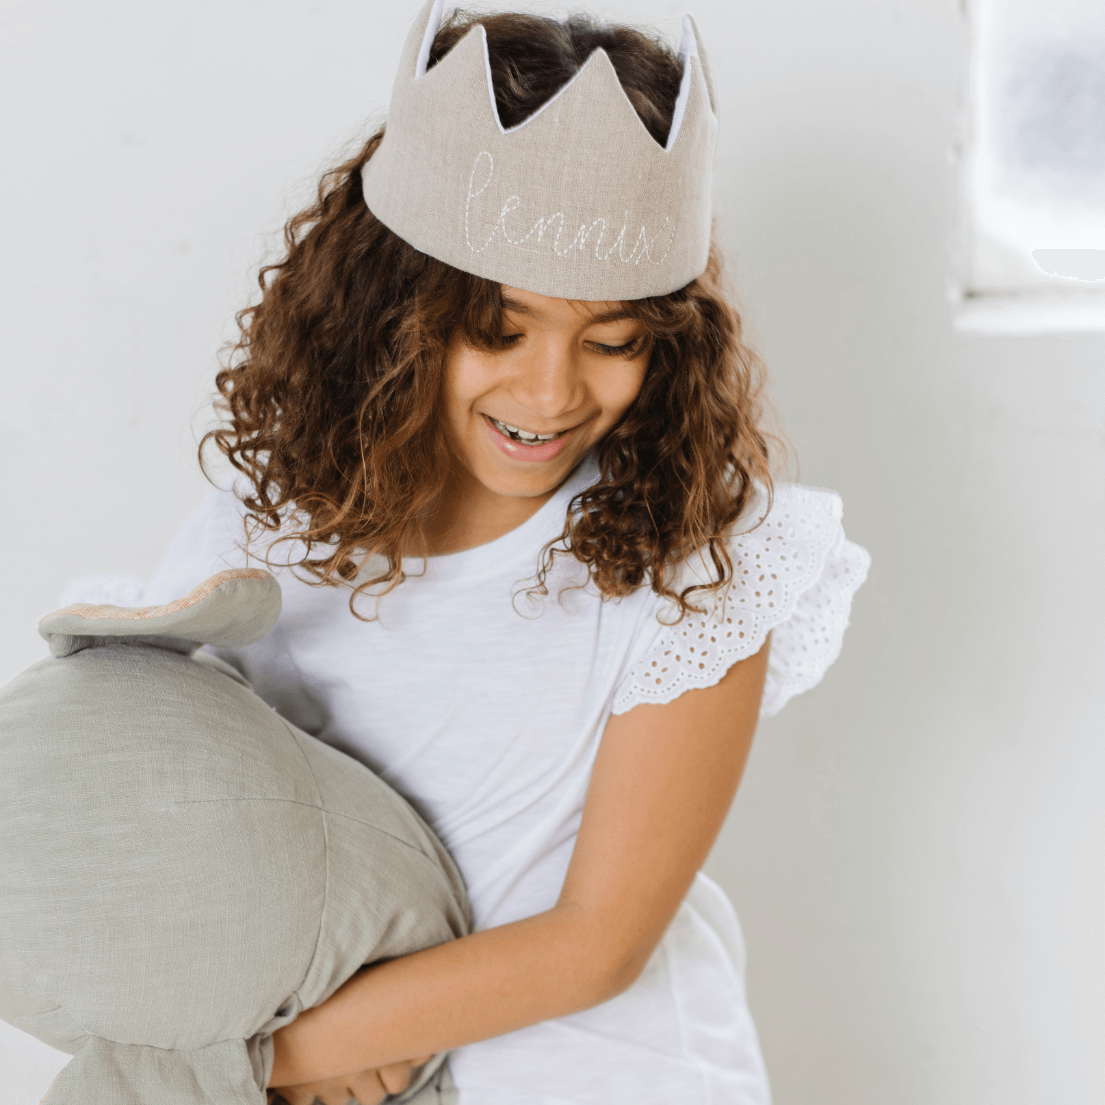 girl wearing a birthday crown and playing with a stuffed animal